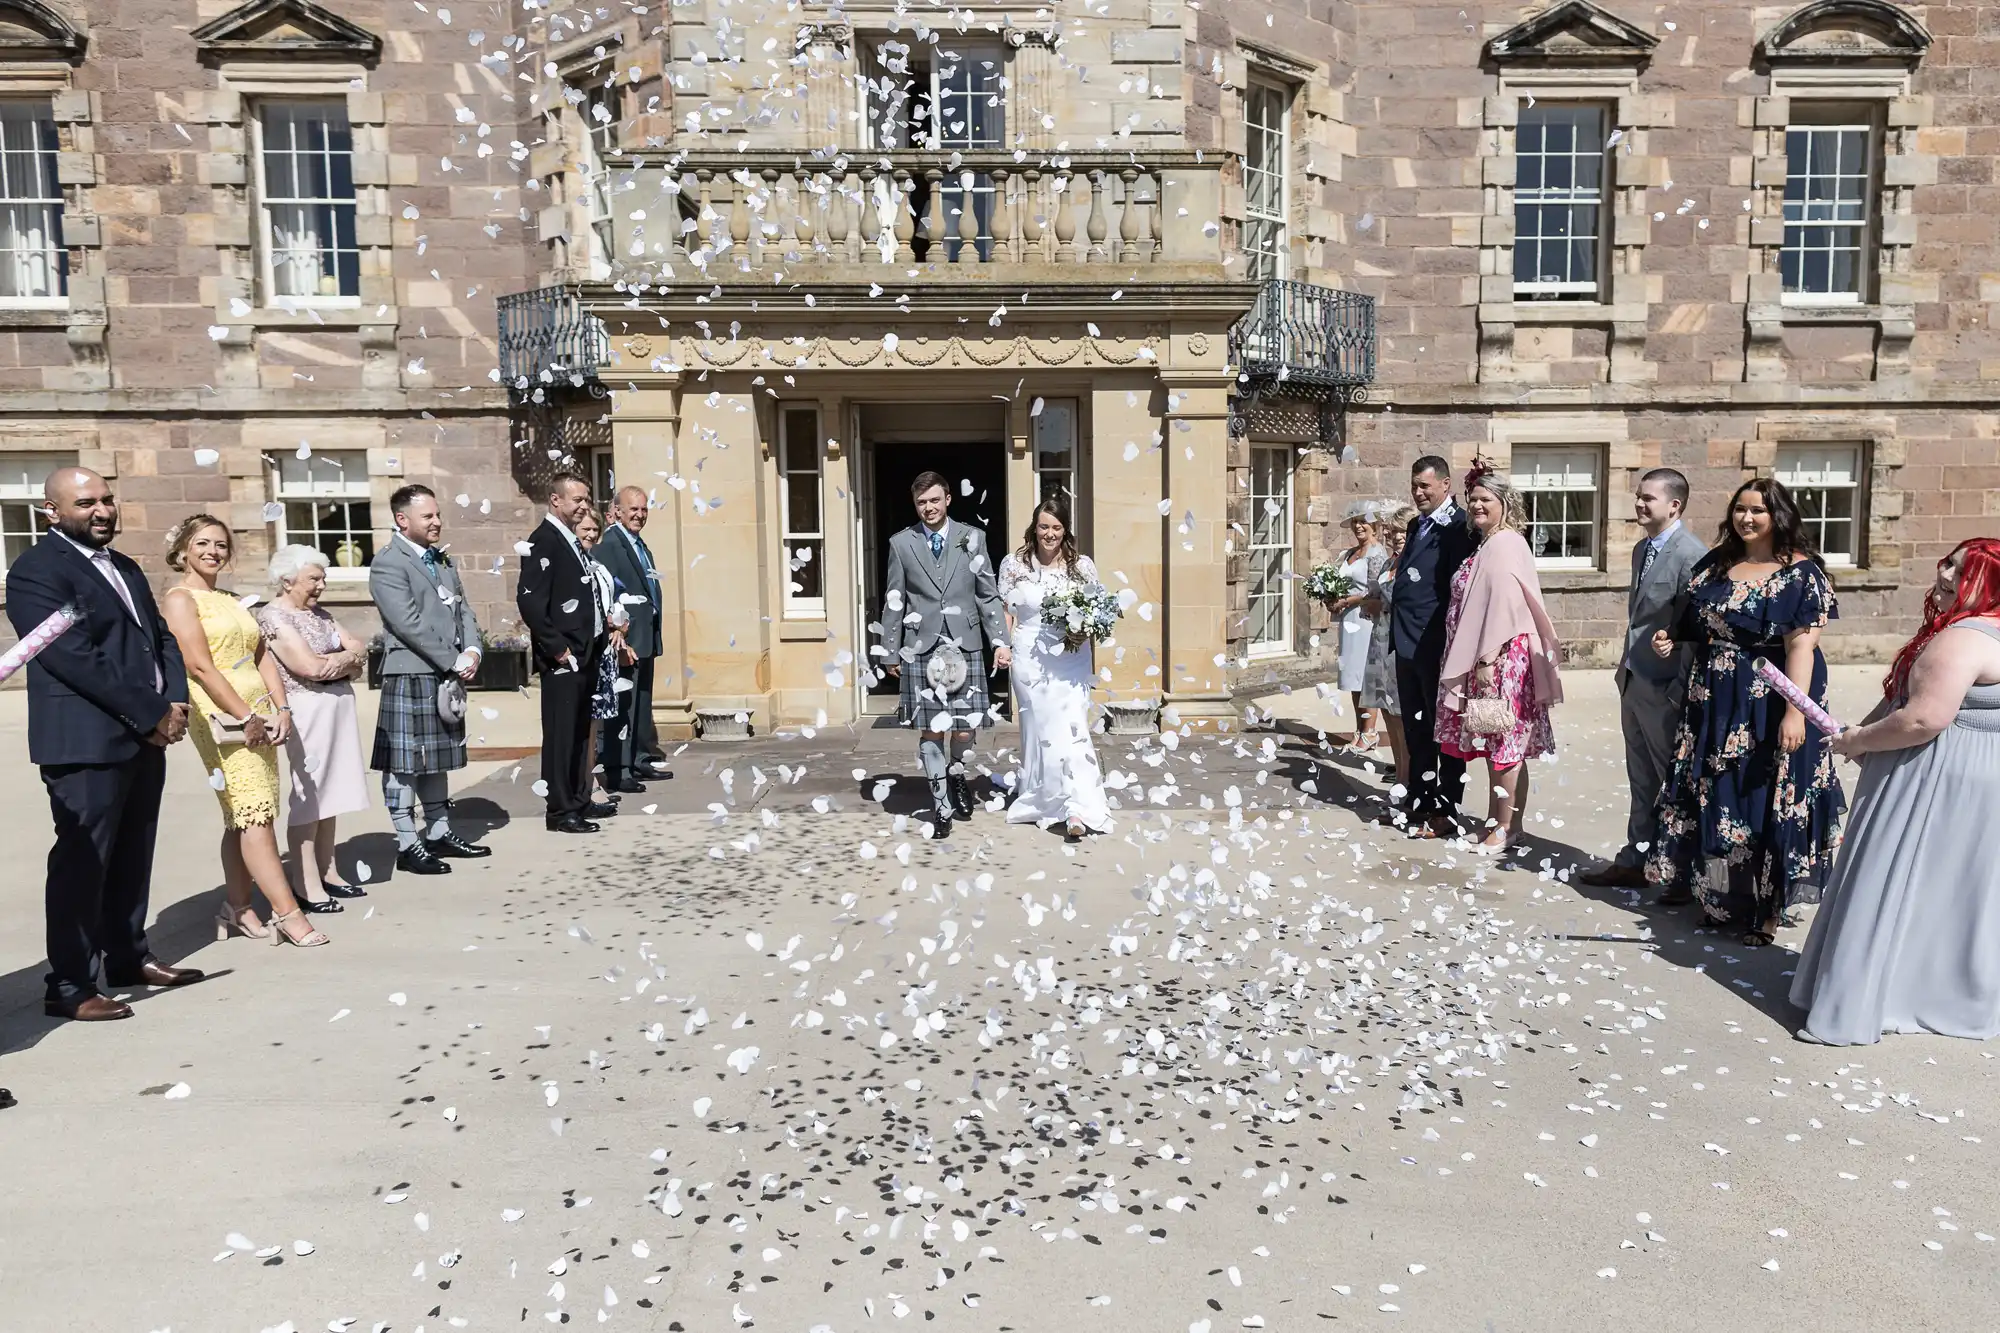 A newlywed couple walking out of a stone building, smiling as guests throw flower petals on a sunny day.